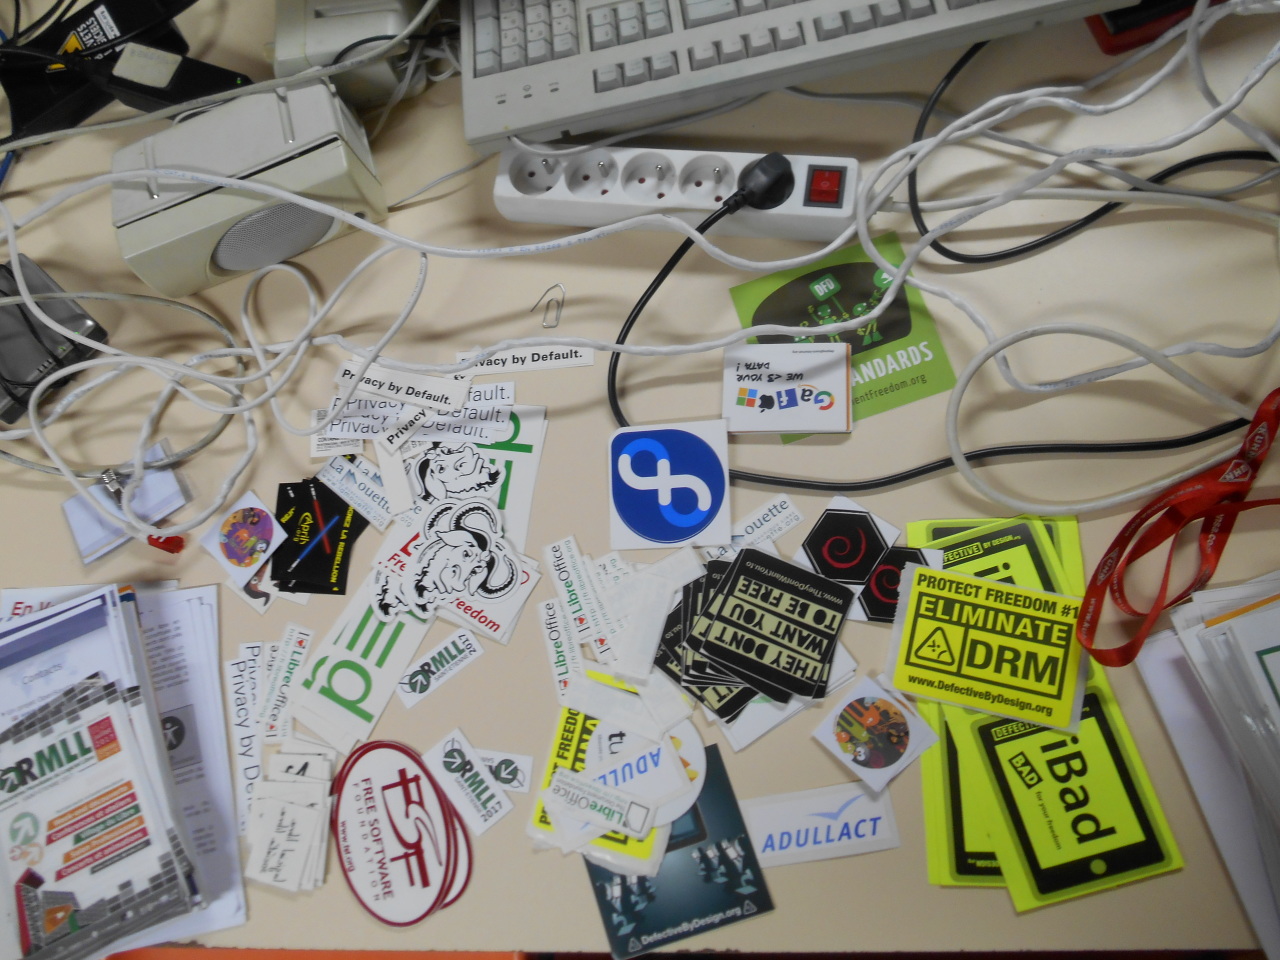 Lots of stickers…